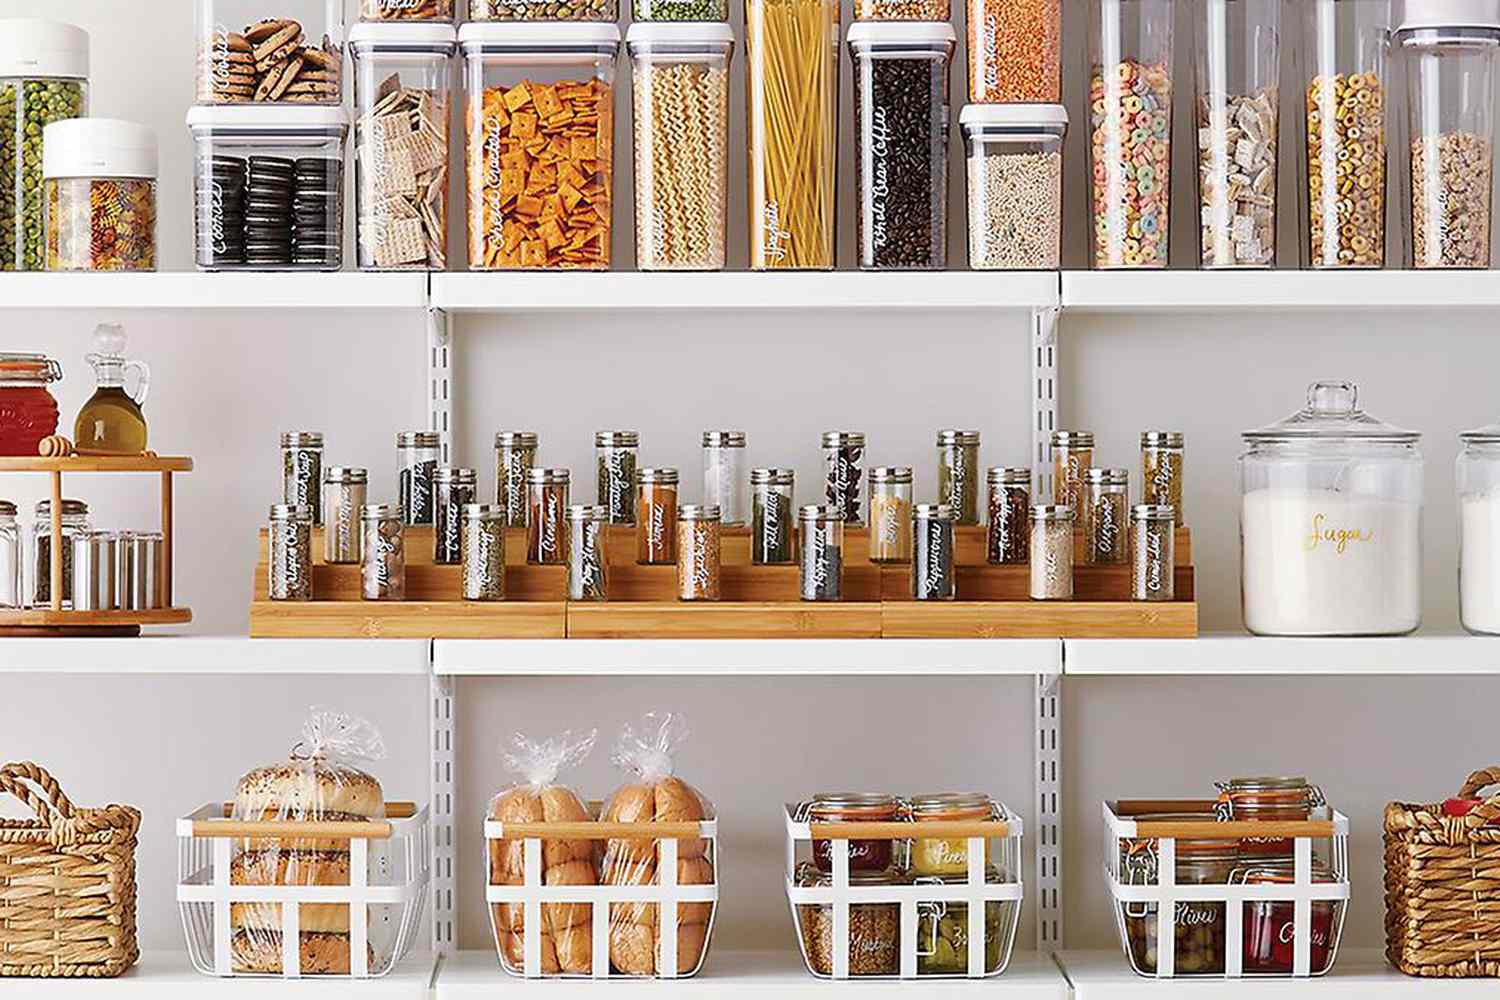 Seven Handy Storage Helpers to Keep Your Home Clutter-Free